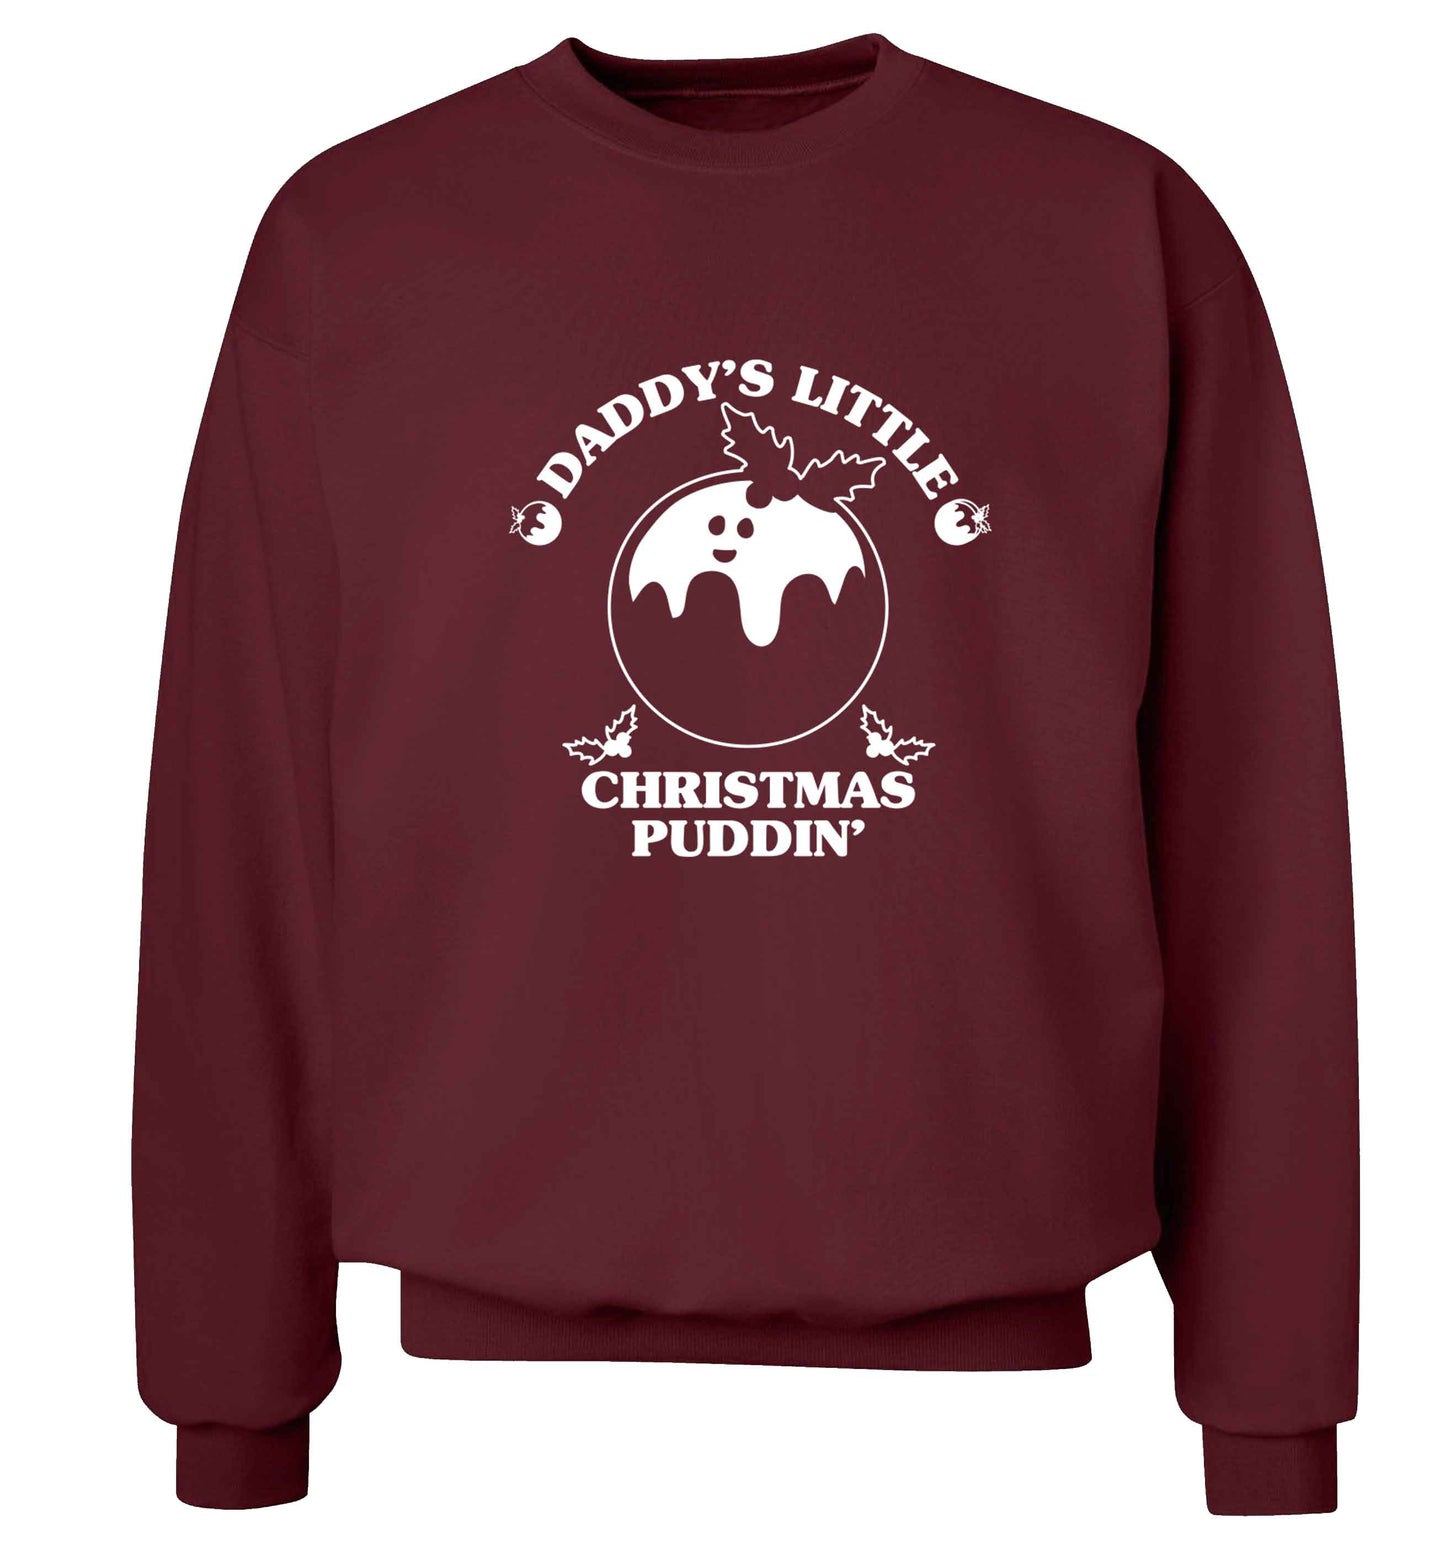 Daddy's little Christmas puddin' Adult's unisex maroon Sweater 2XL